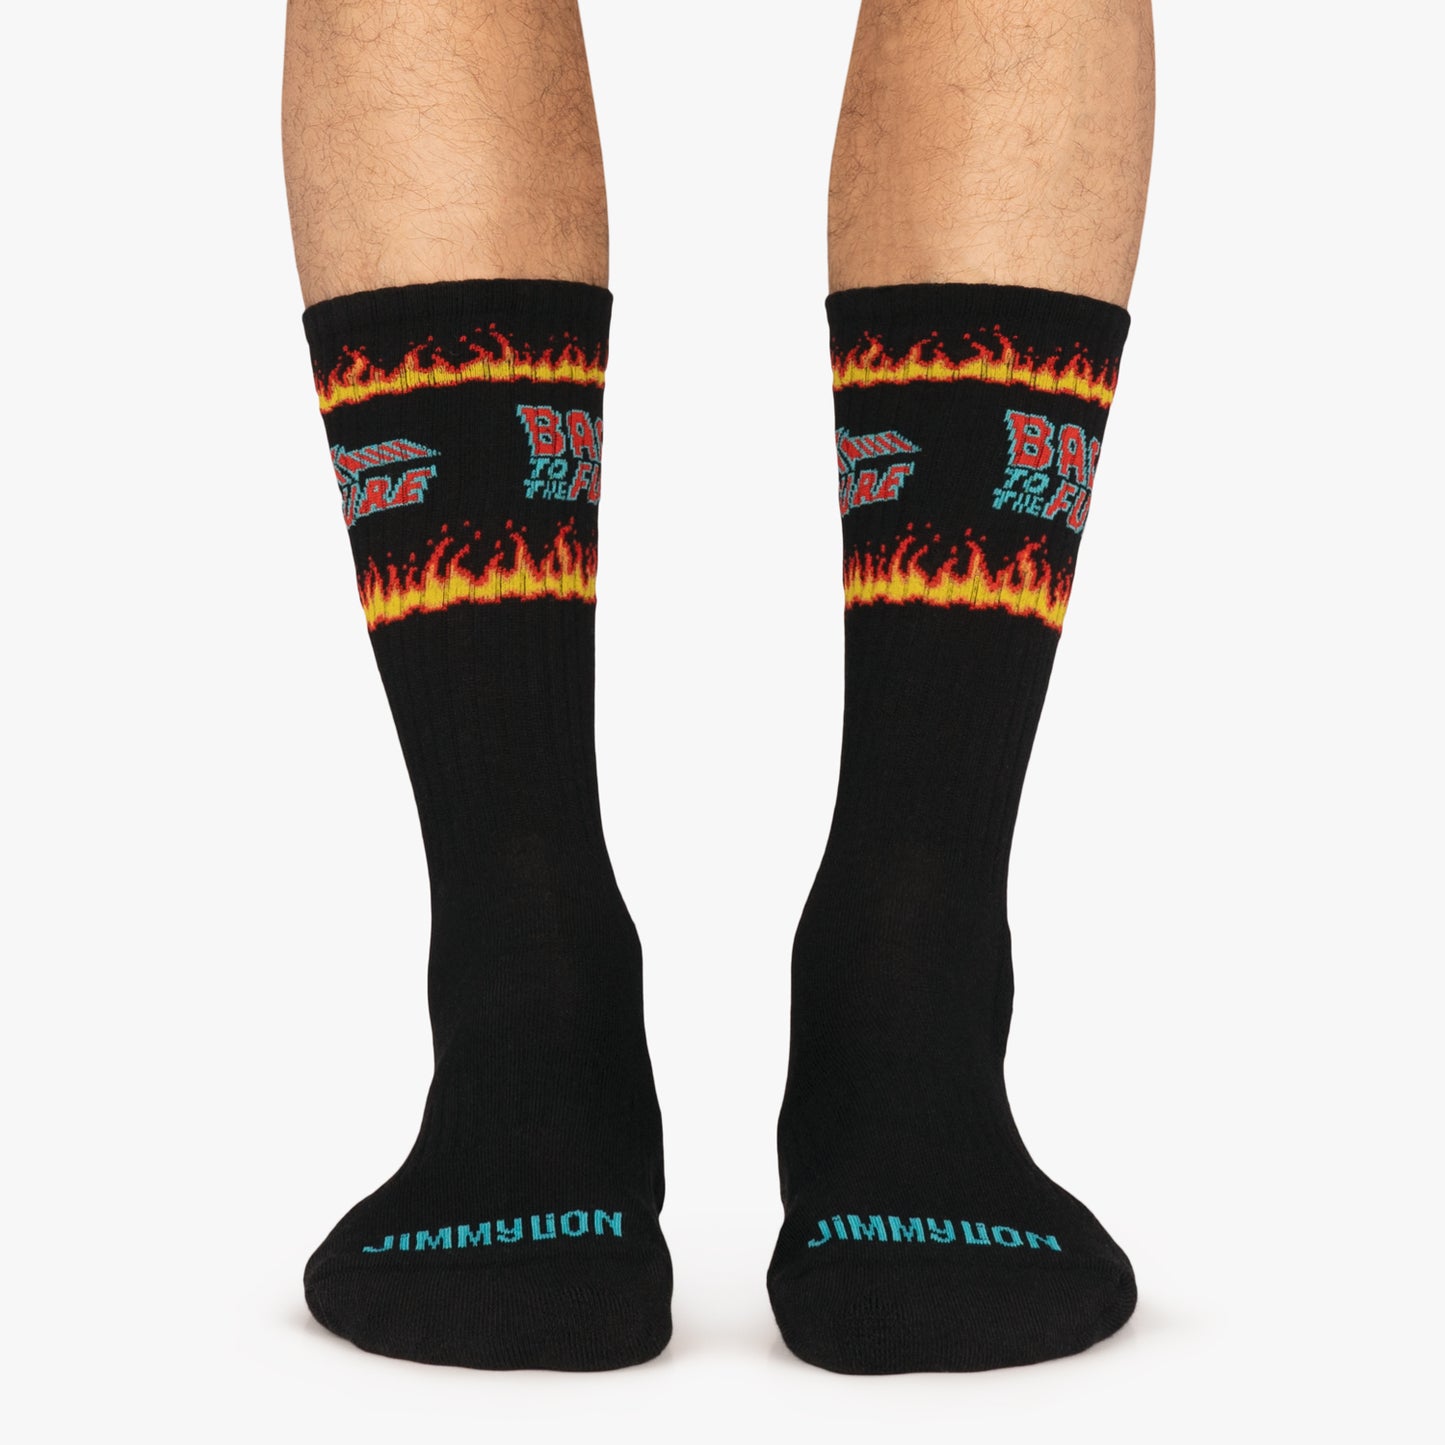 Athletic Fire - Black (1)